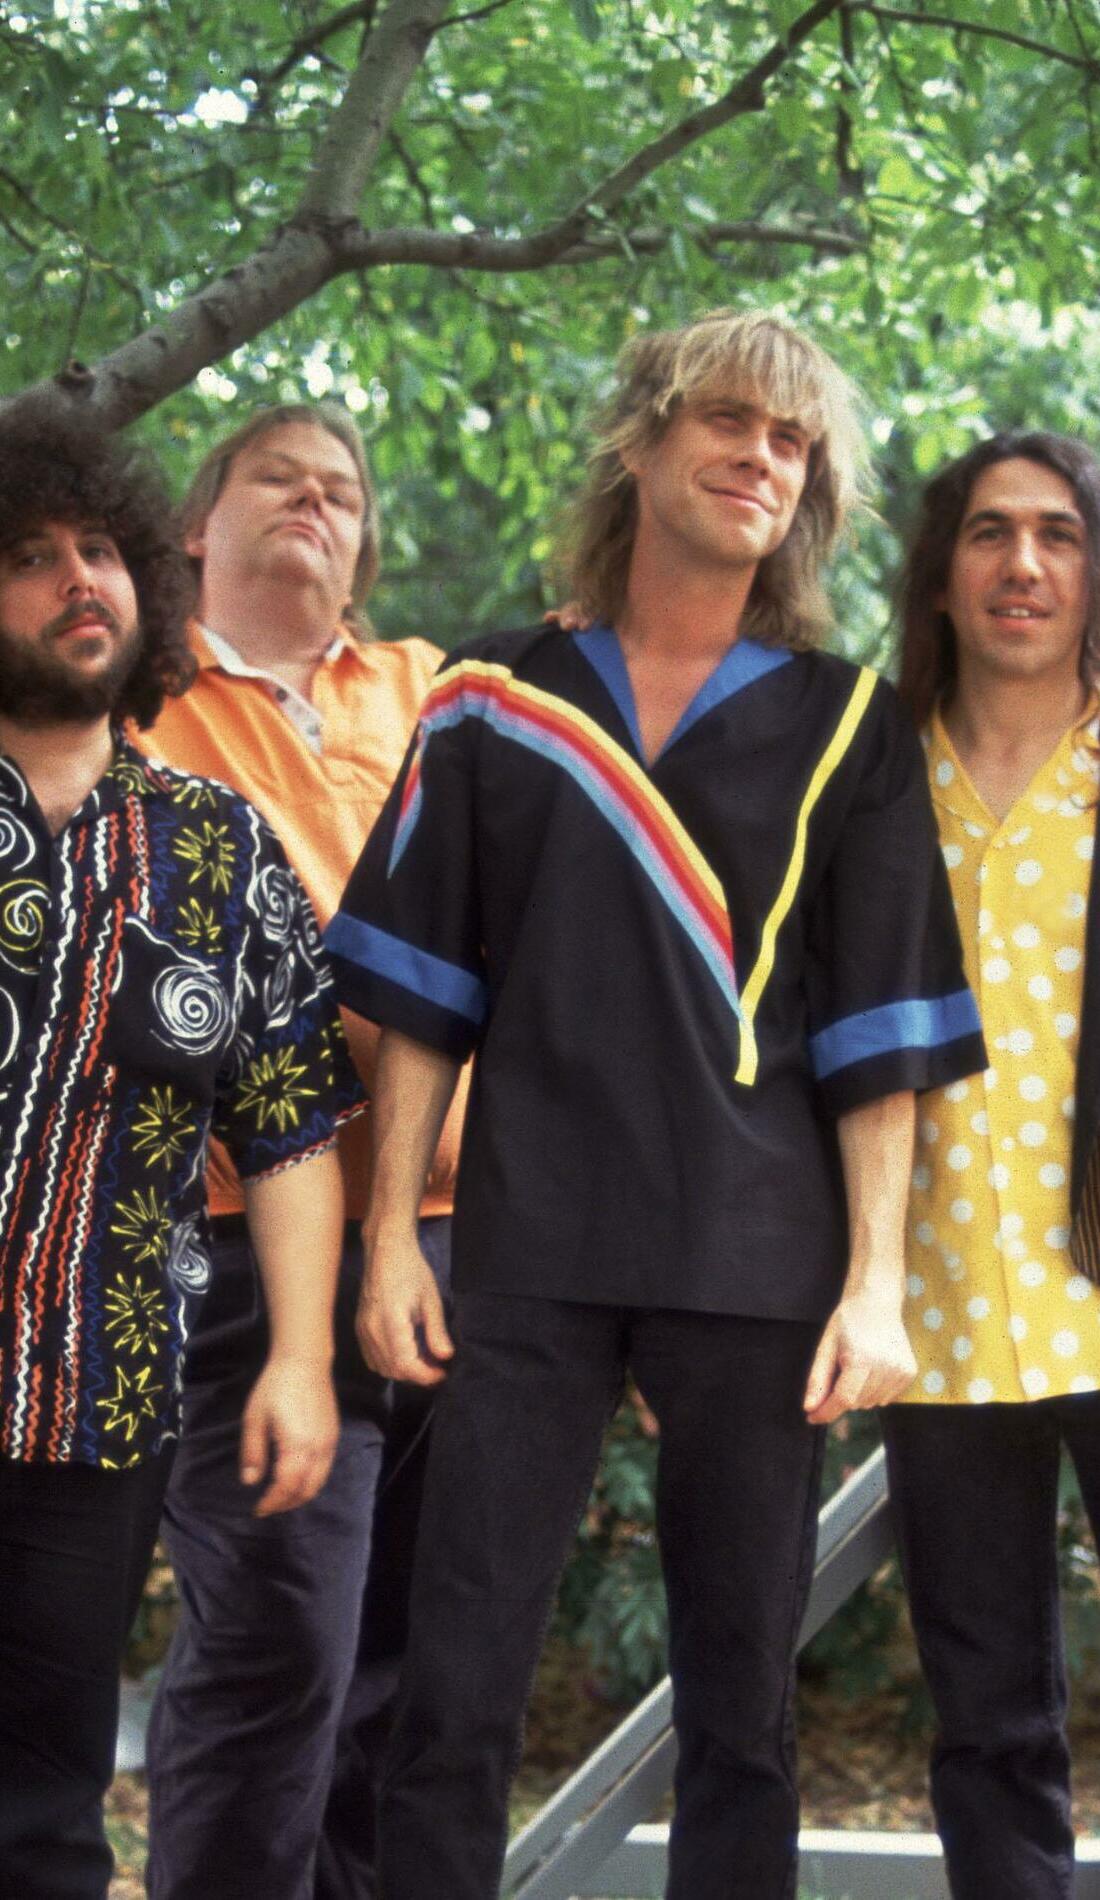 A NRBQ live event